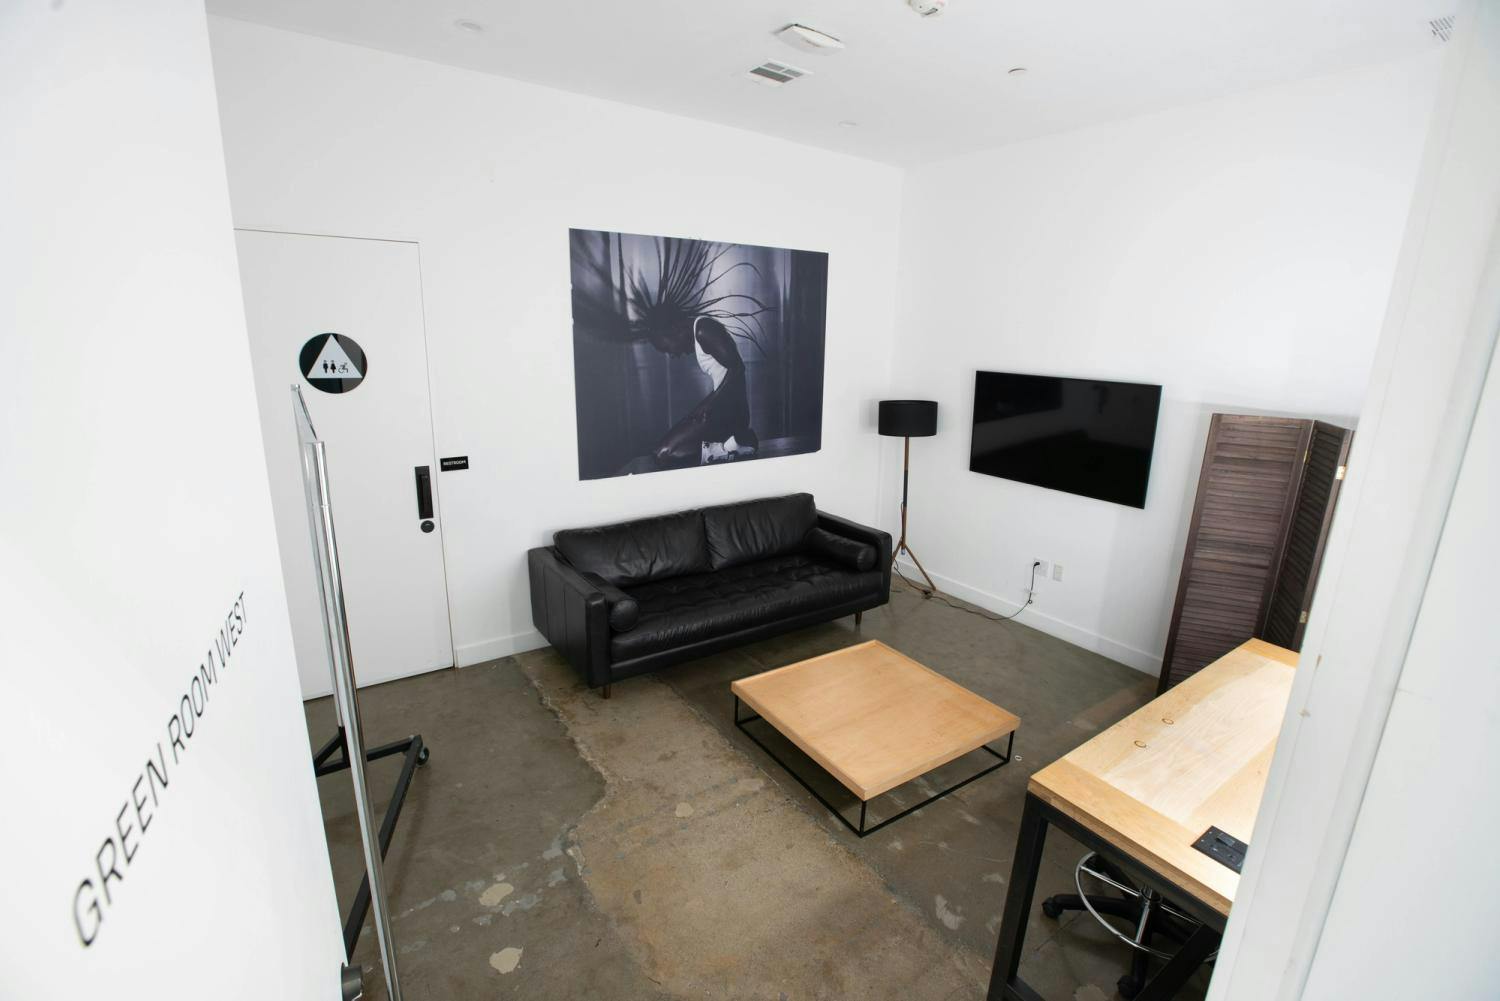 A clean, modern green room with a black leather couch, wooden coffee table, flat-screen TV, and a large canvas print, viewed from behind a glass partition with "GREEN ROOM WEST" lettering.